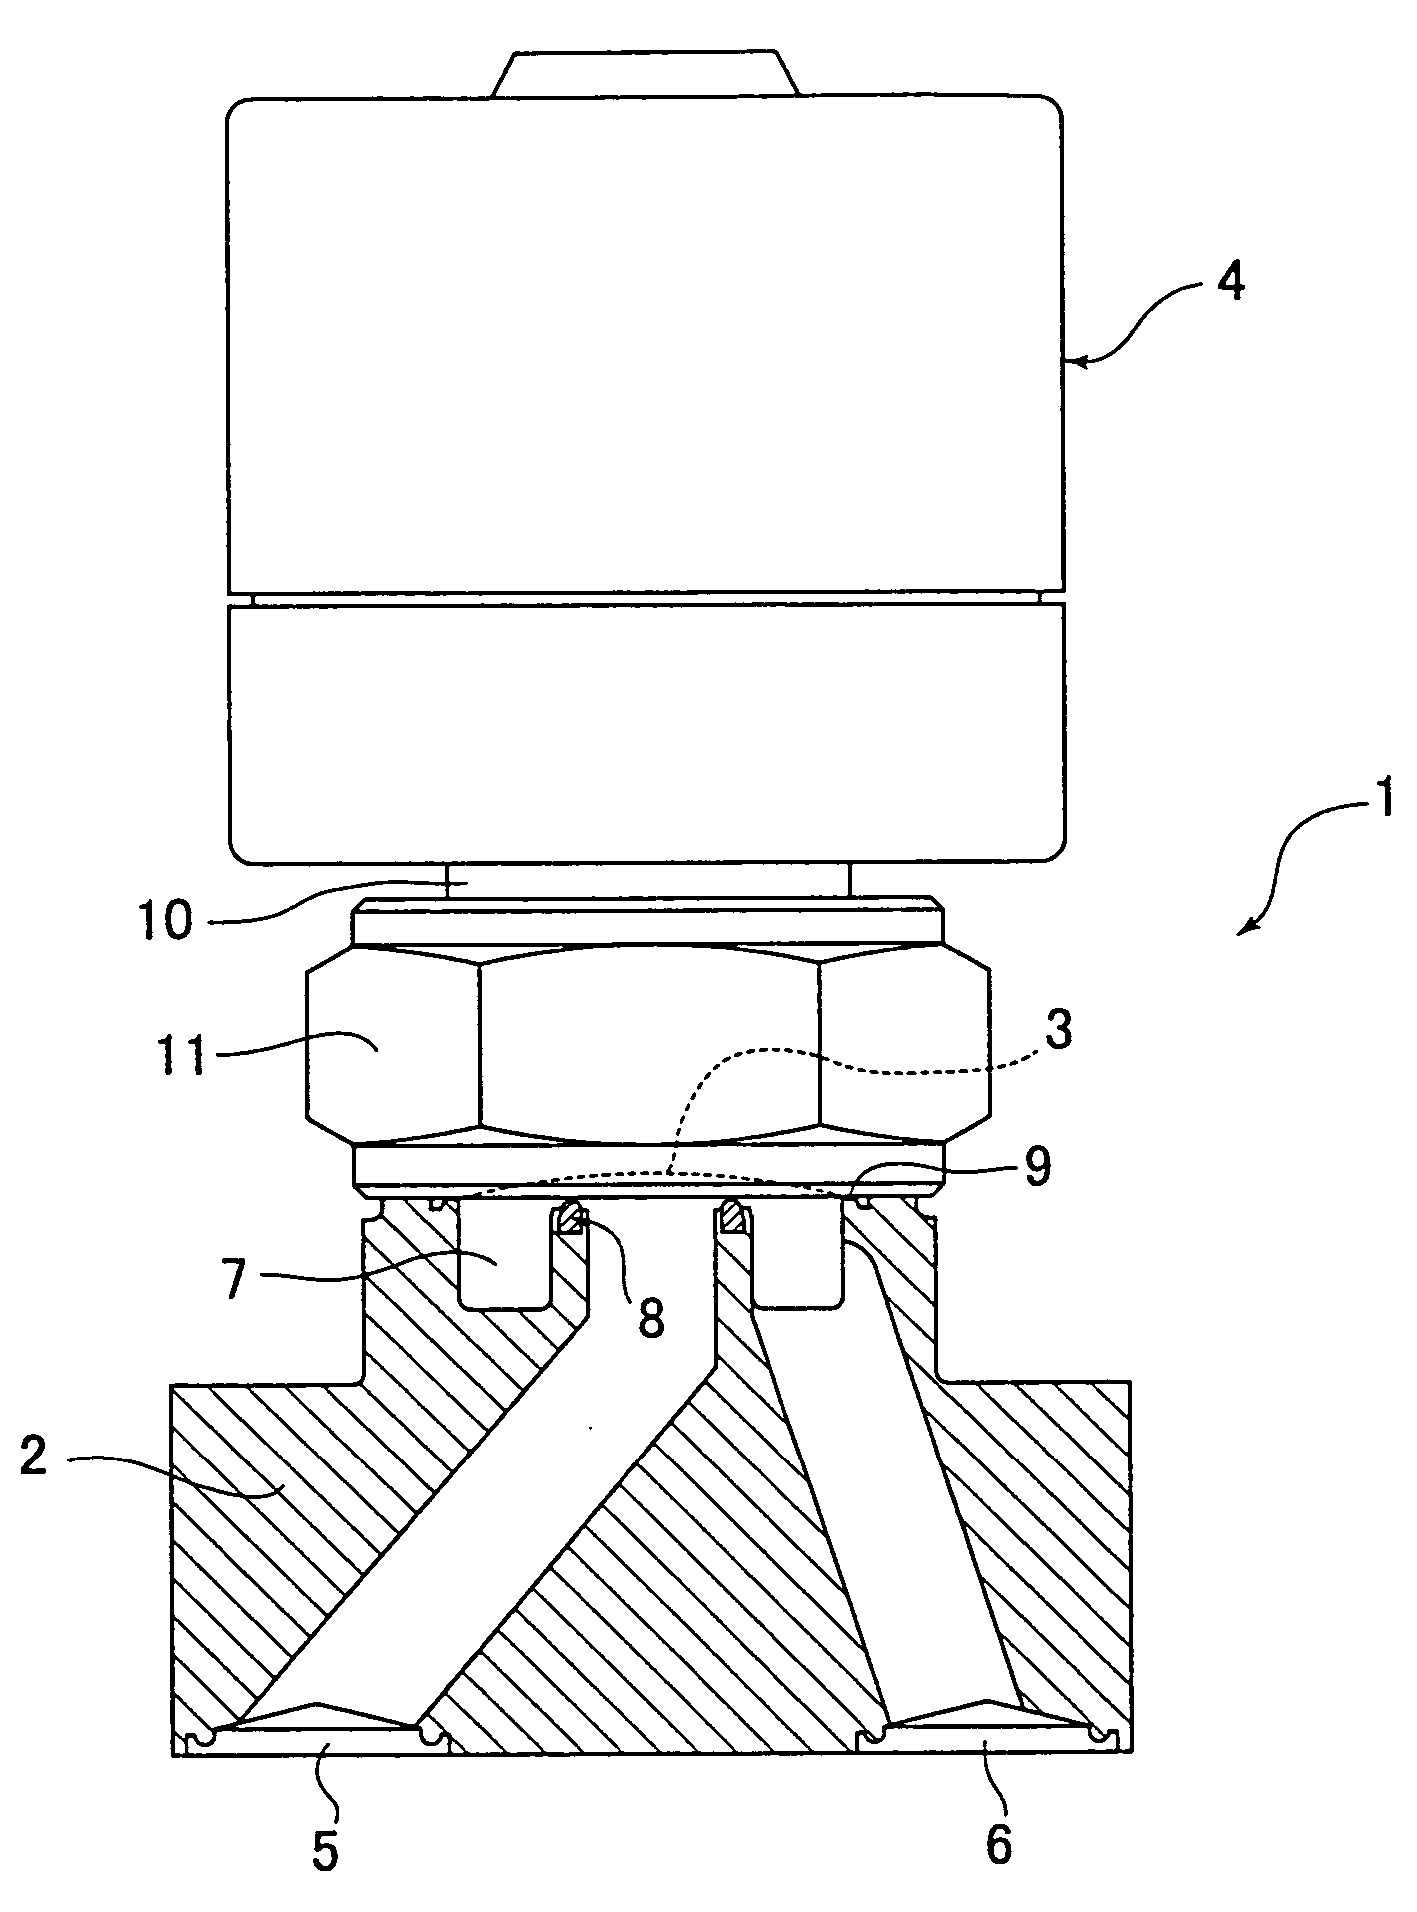 Valve for vacuum exhaustion system